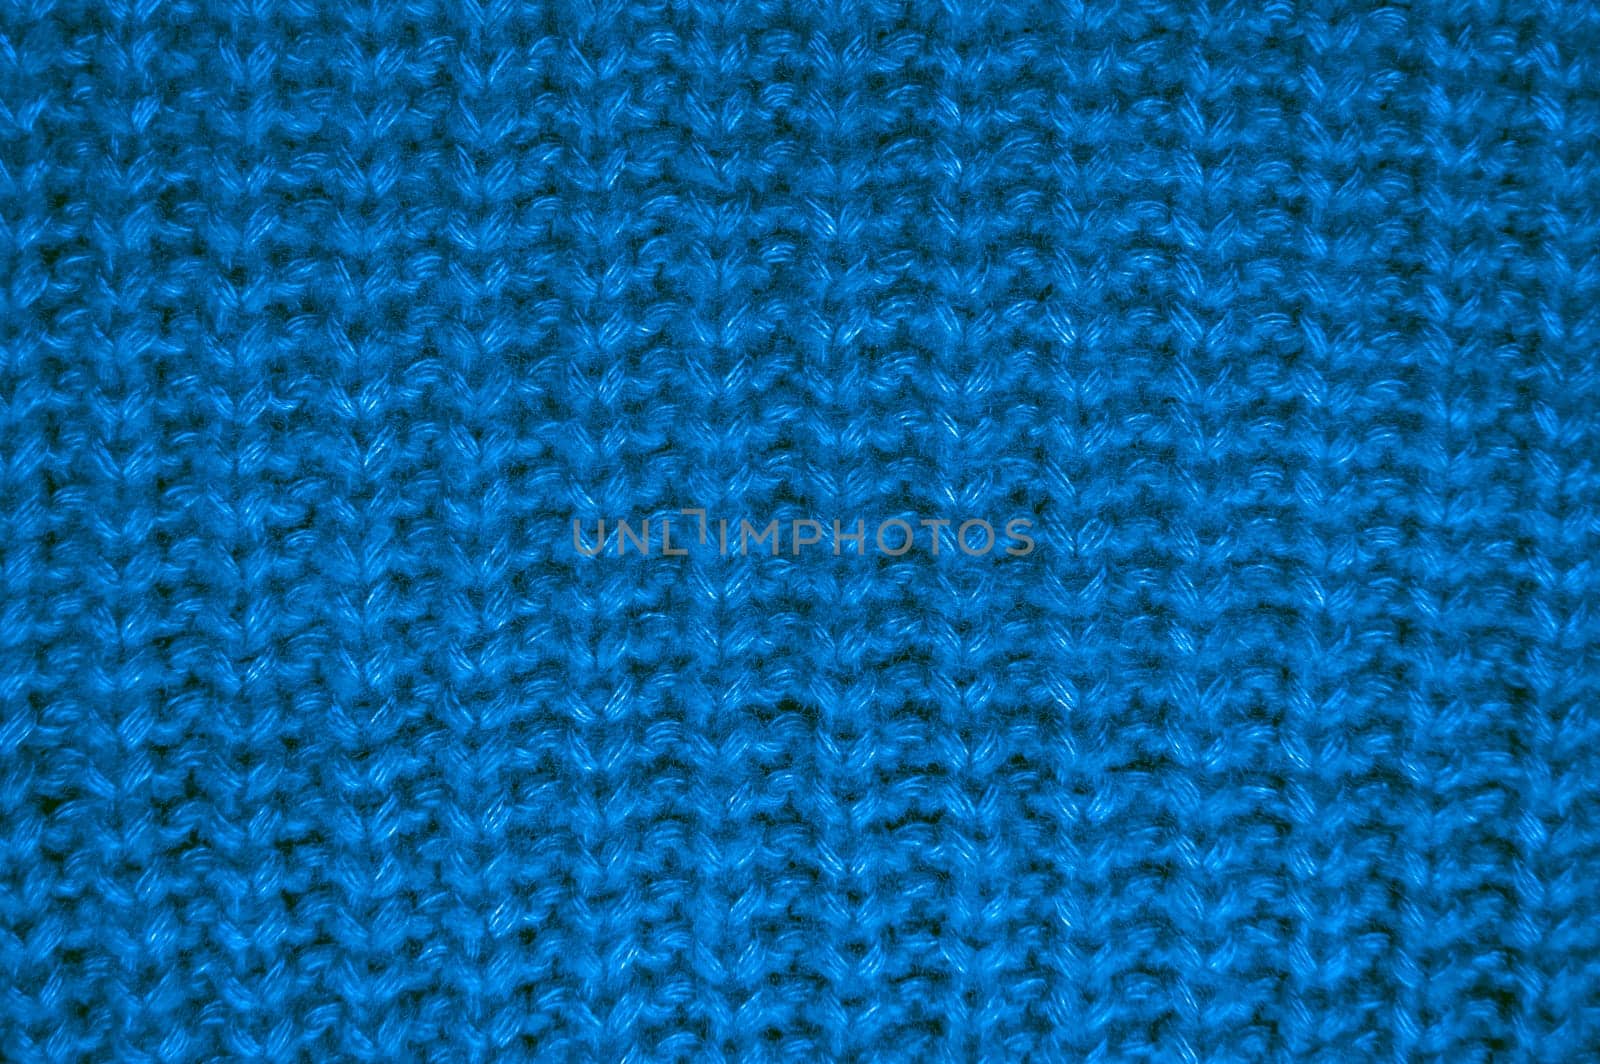 Structure Knitted Background. Abstract Wool Pullover. Jacquard Xmas Sweater. Fiber Knitted Texture. Macro Thread. Scandinavian Winter Blanket. Cotton Print Wallpaper. Knitting Texture.